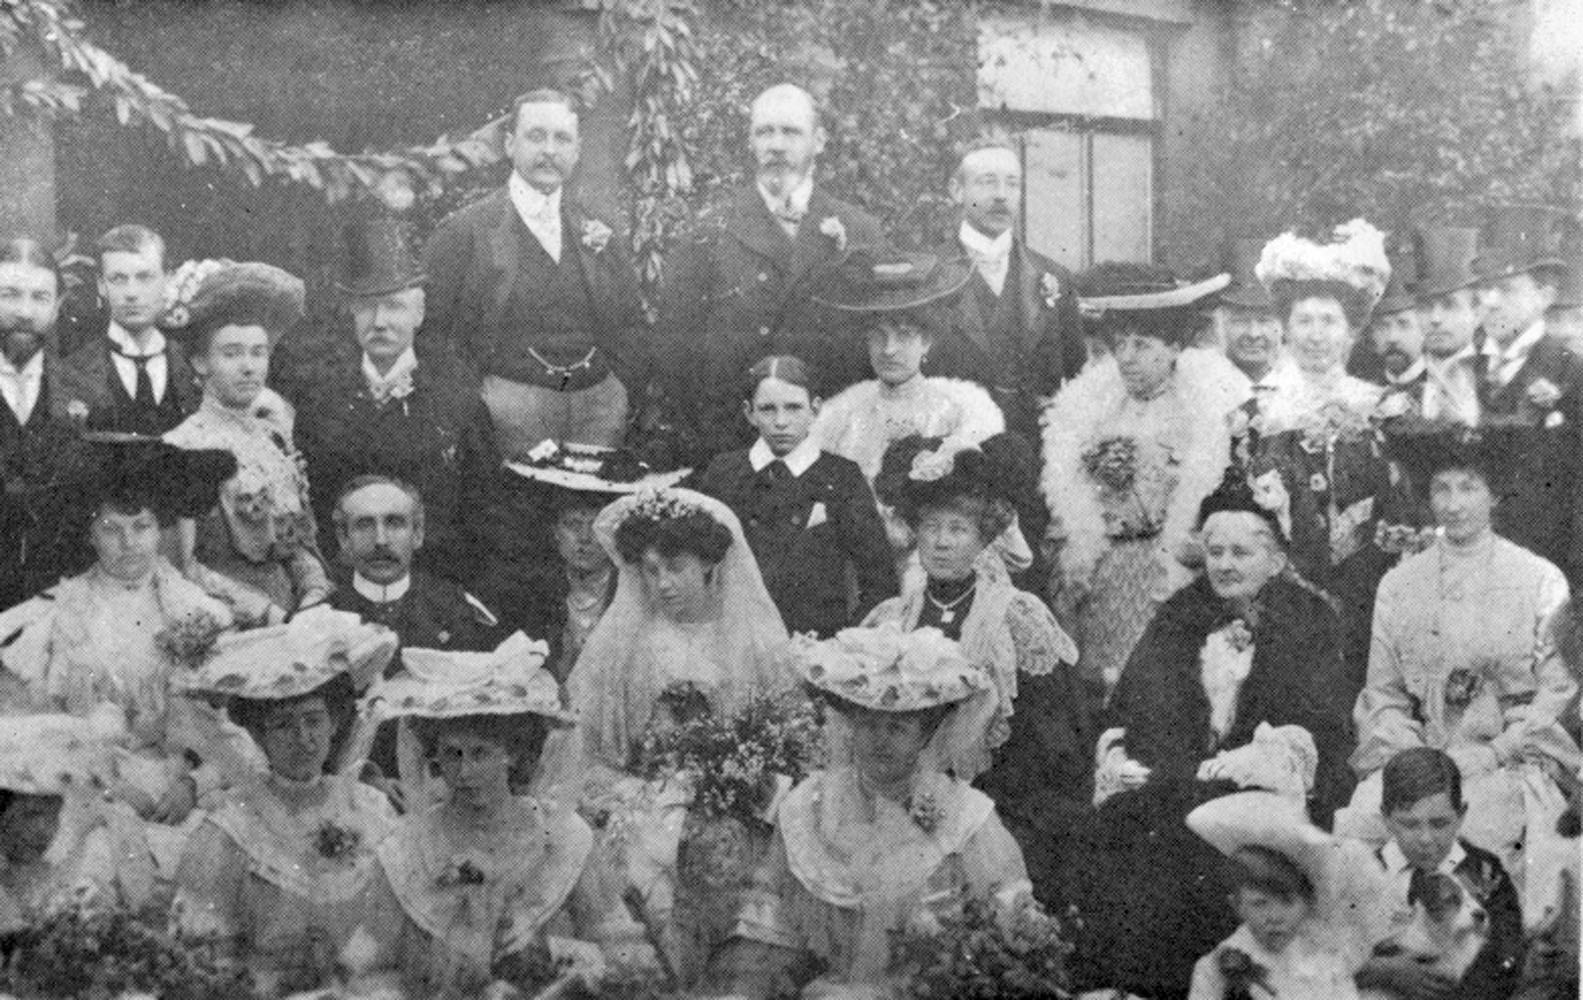 Netherhall Wedding Group Showing The Lord Of The Manor And Family 1900